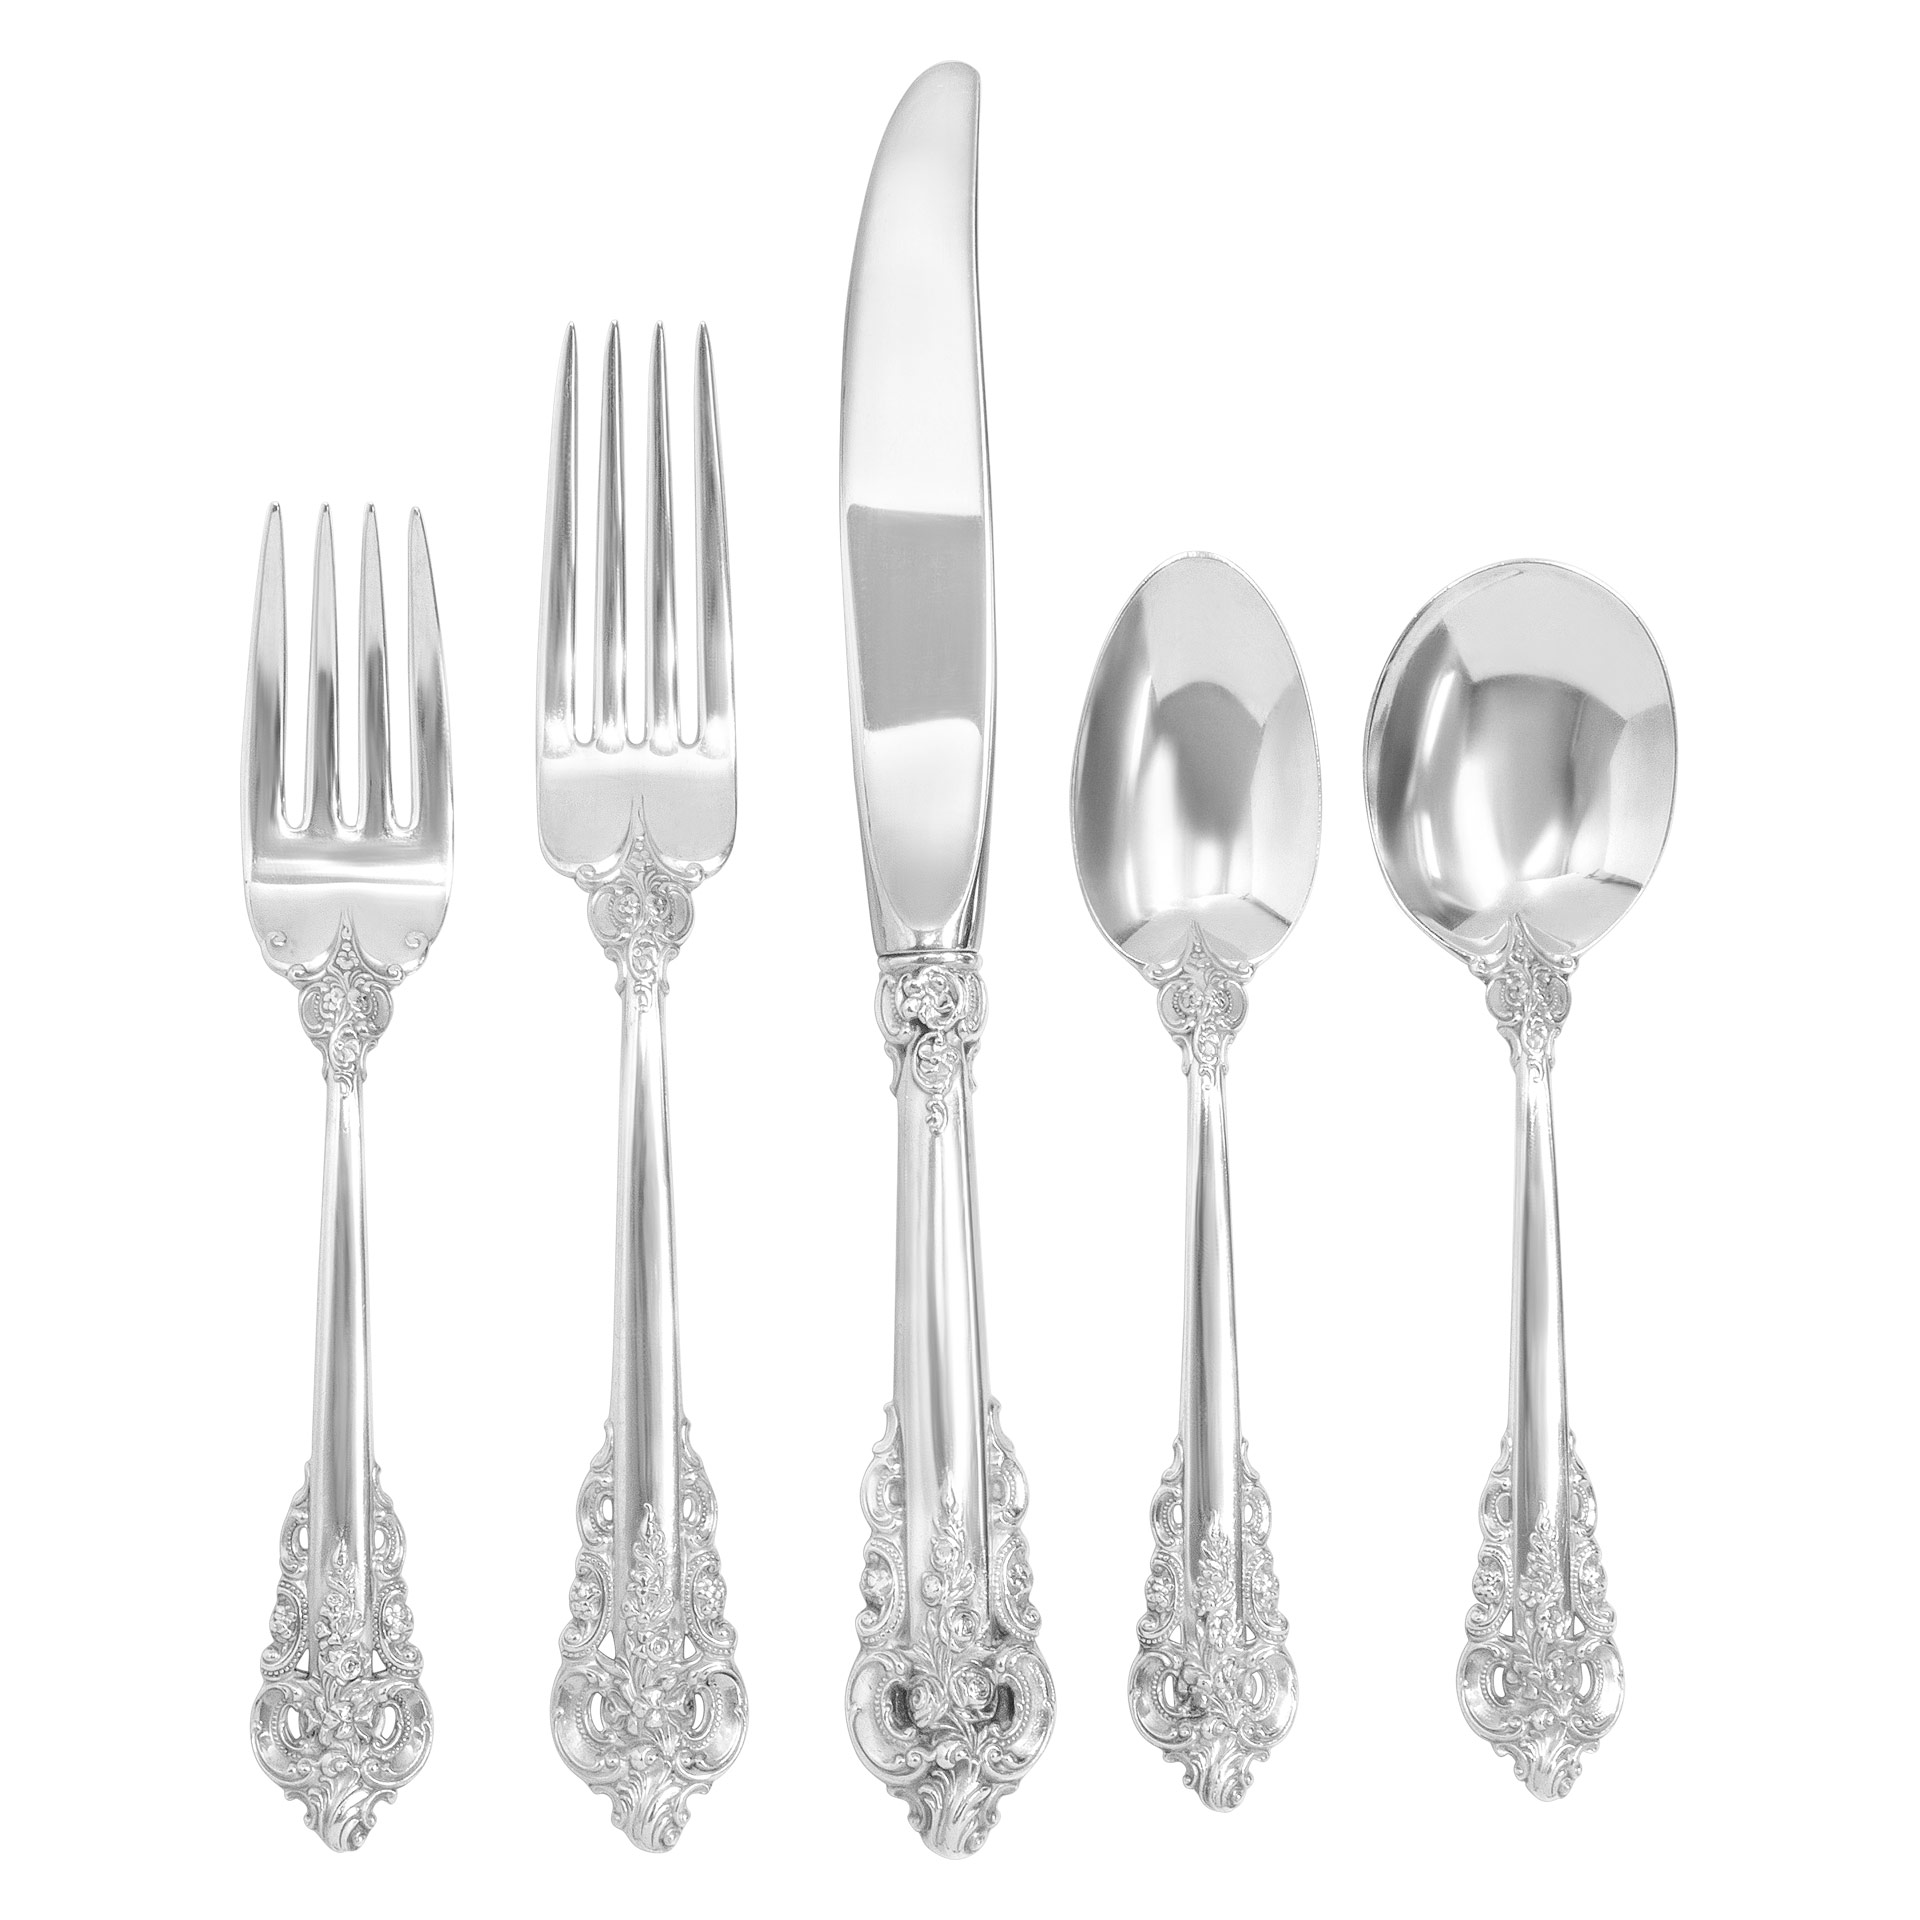 "GRANDE BAROQUE" Sterling Silver Flatware Set by Wallace, patented in 1941. 5 place settings for 12 with xtra. TOTAL 76 pieces.